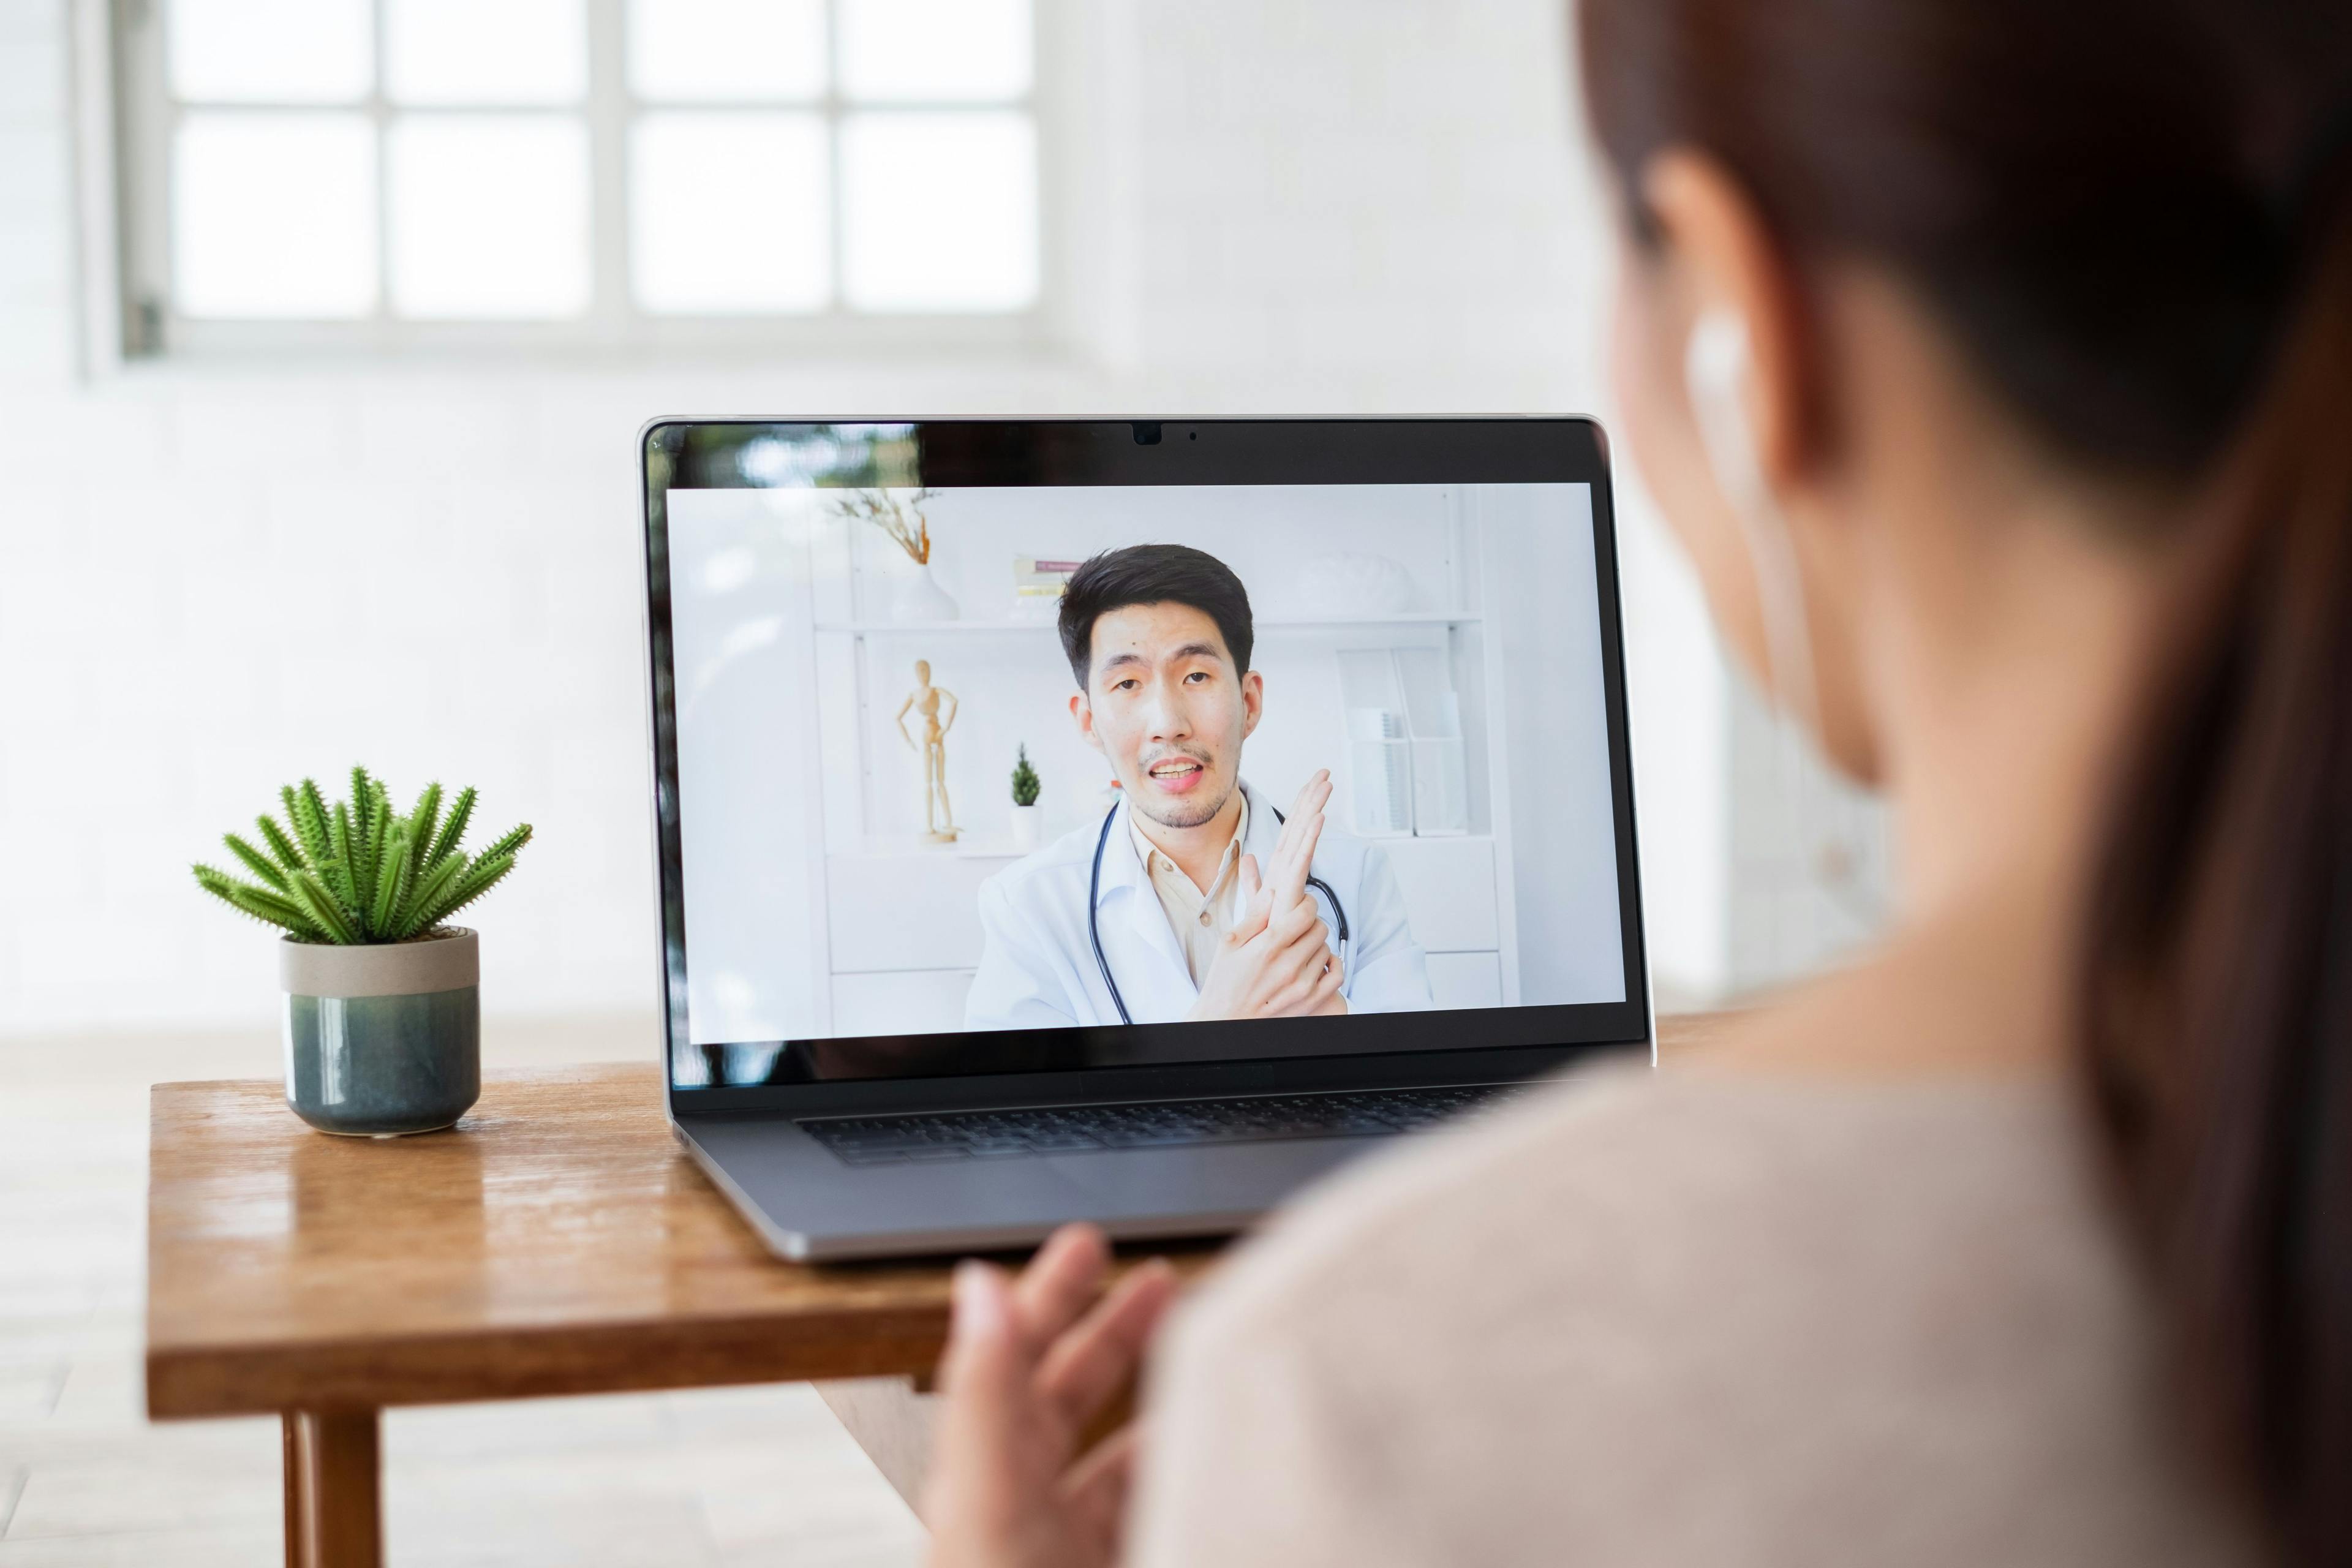 Telehealth and primary care: Most virtual visits don’t lead to in-person appointments